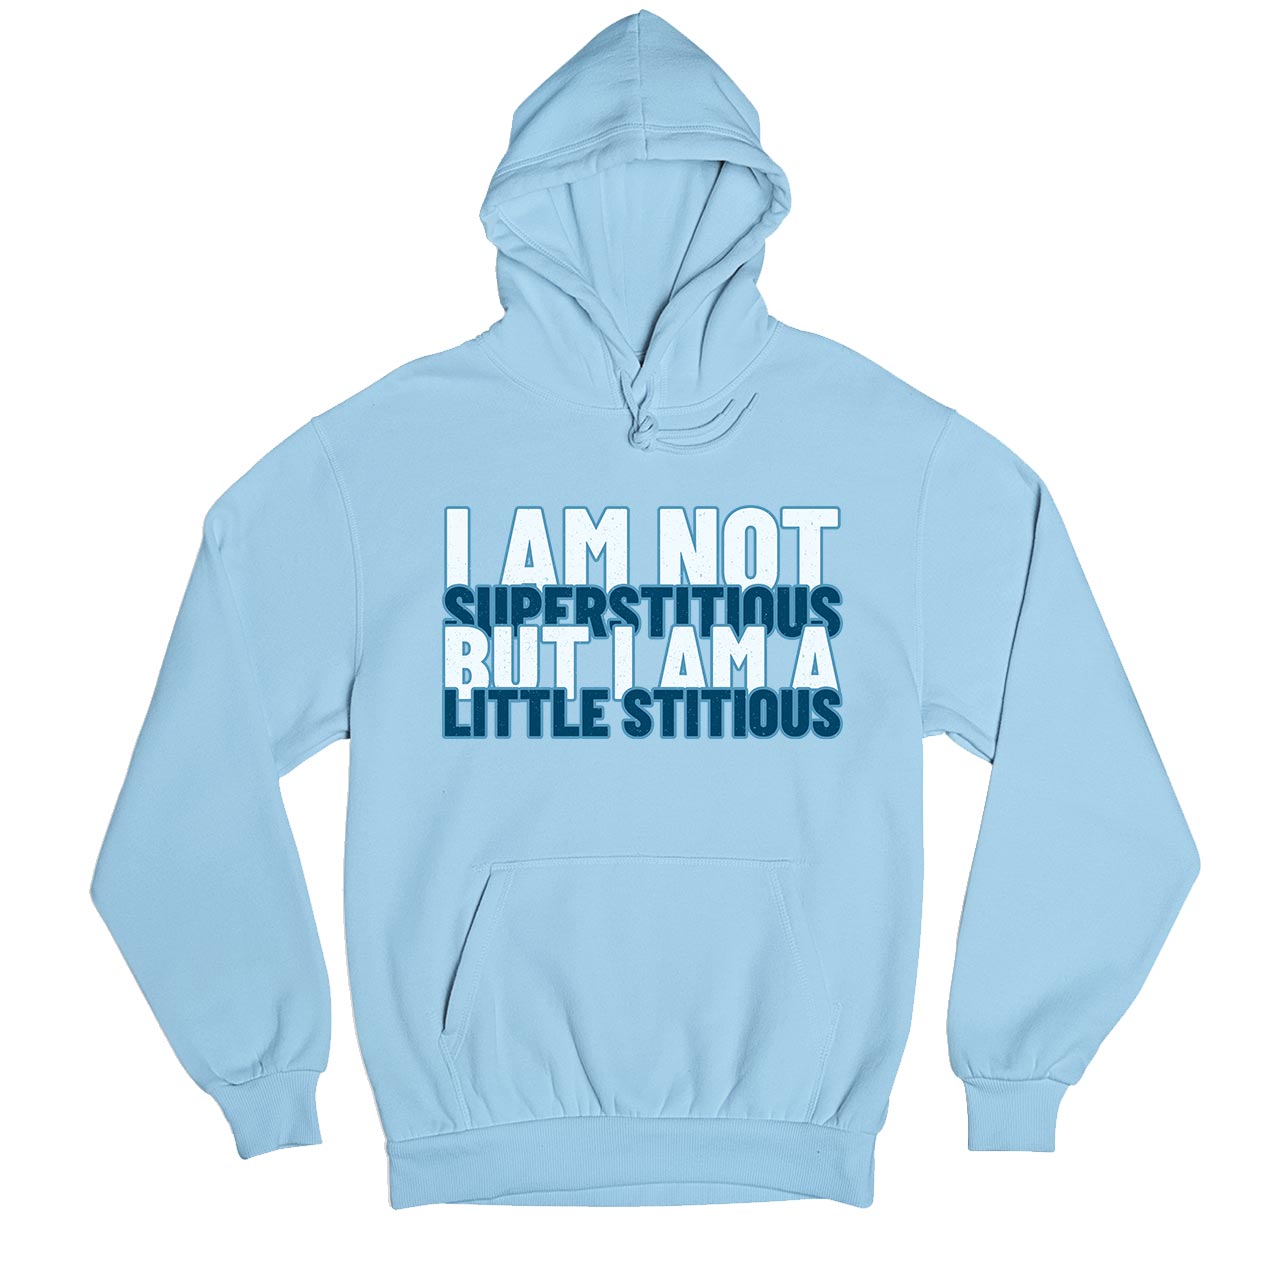 the office i am not superstitious i am a little stitious hoodie hooded sweatshirt winterwear tv & movies buy online usa united states of america the banyan tee tbt men women girls boys unisex black - michael scott quote